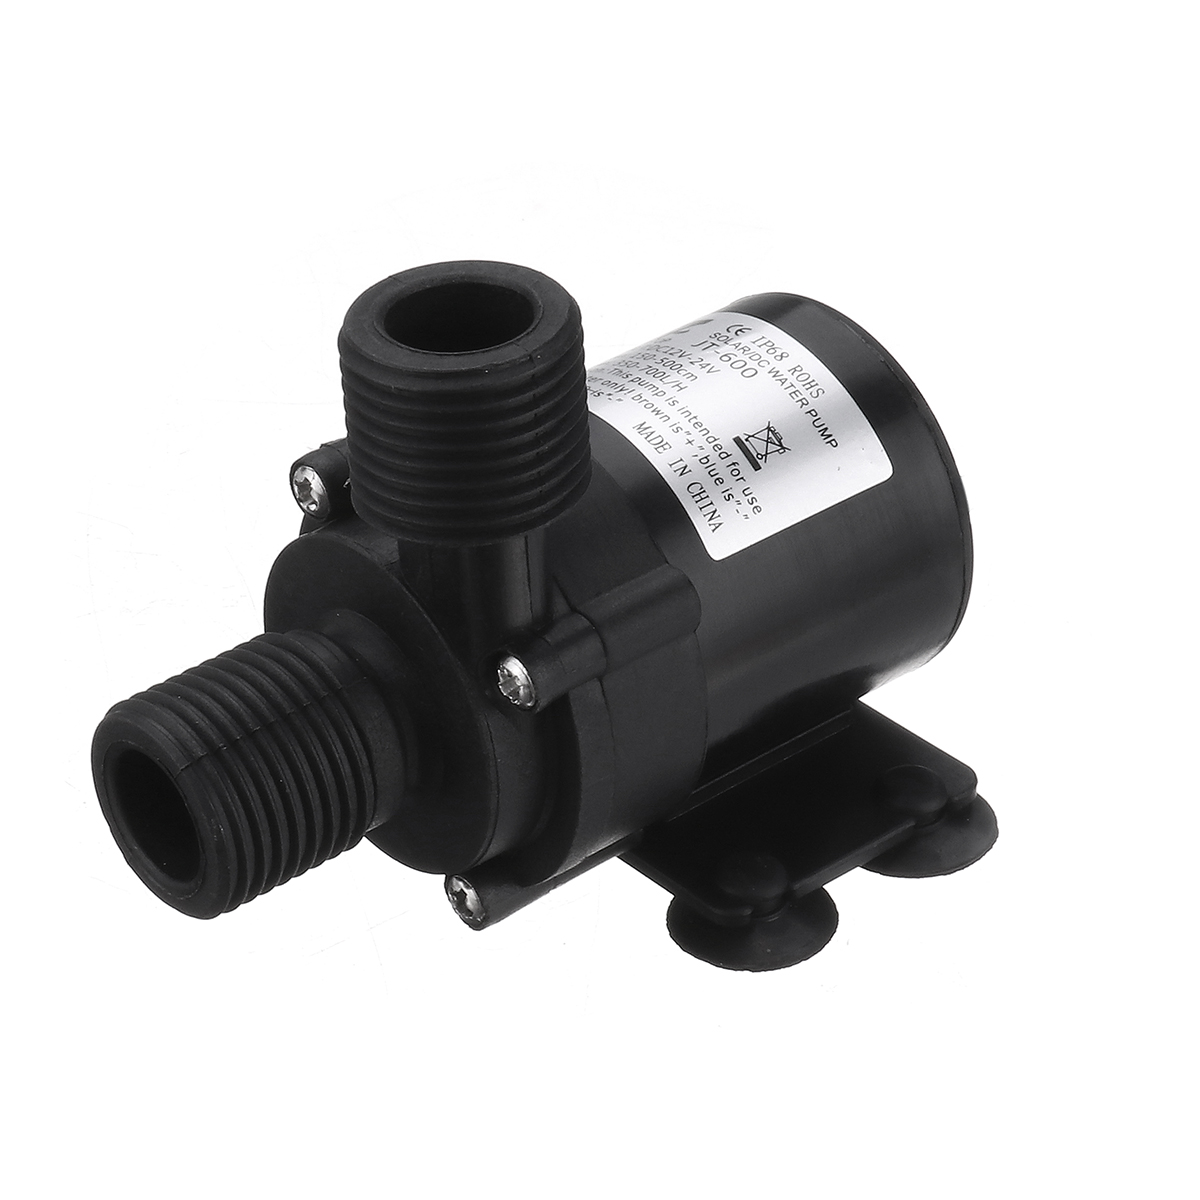 24V12V-Hot-Water-Pump-for-Circulating-Micro-DC-Water-Pump-With-12-Inch-Threaded-Multifunction-Brushl-1435180-4